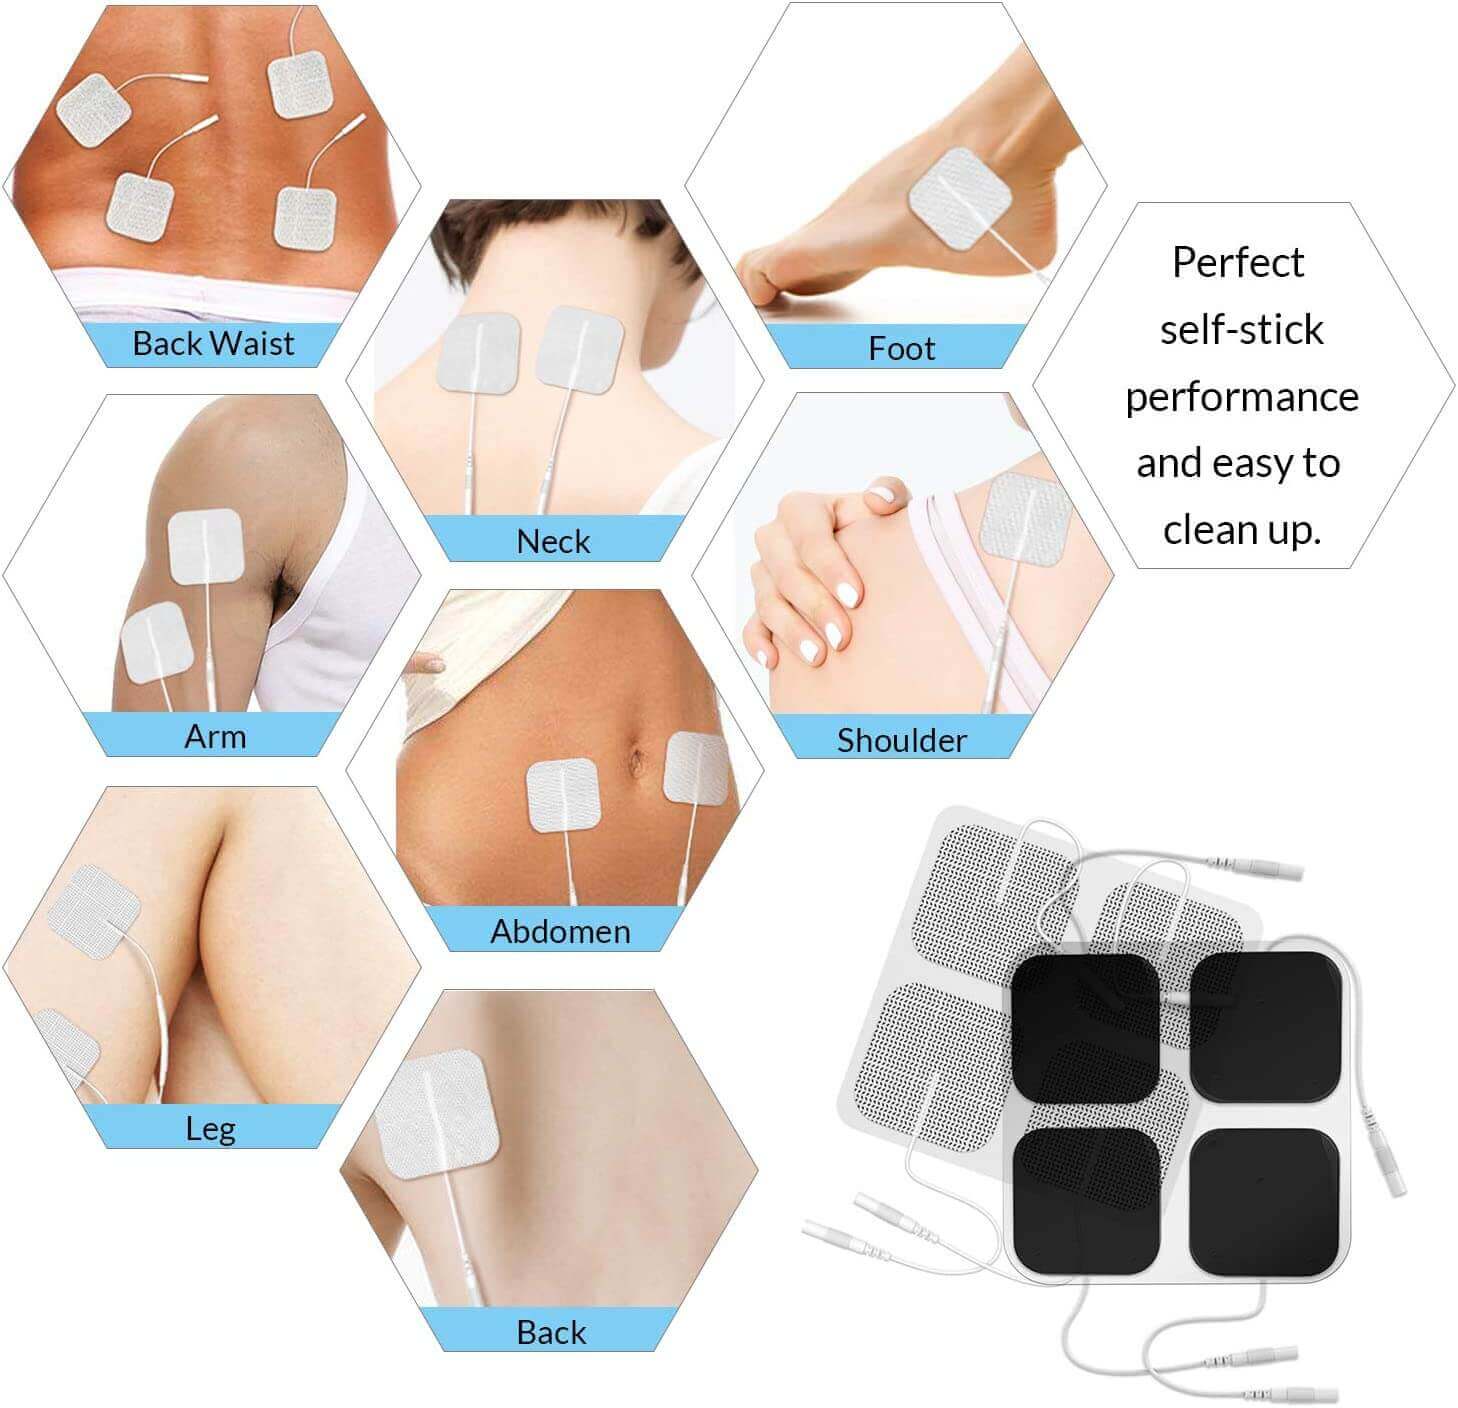 DONECO replacement pads for tens unit - 48 Pcs - 2x2in use of where is feels pain on your body